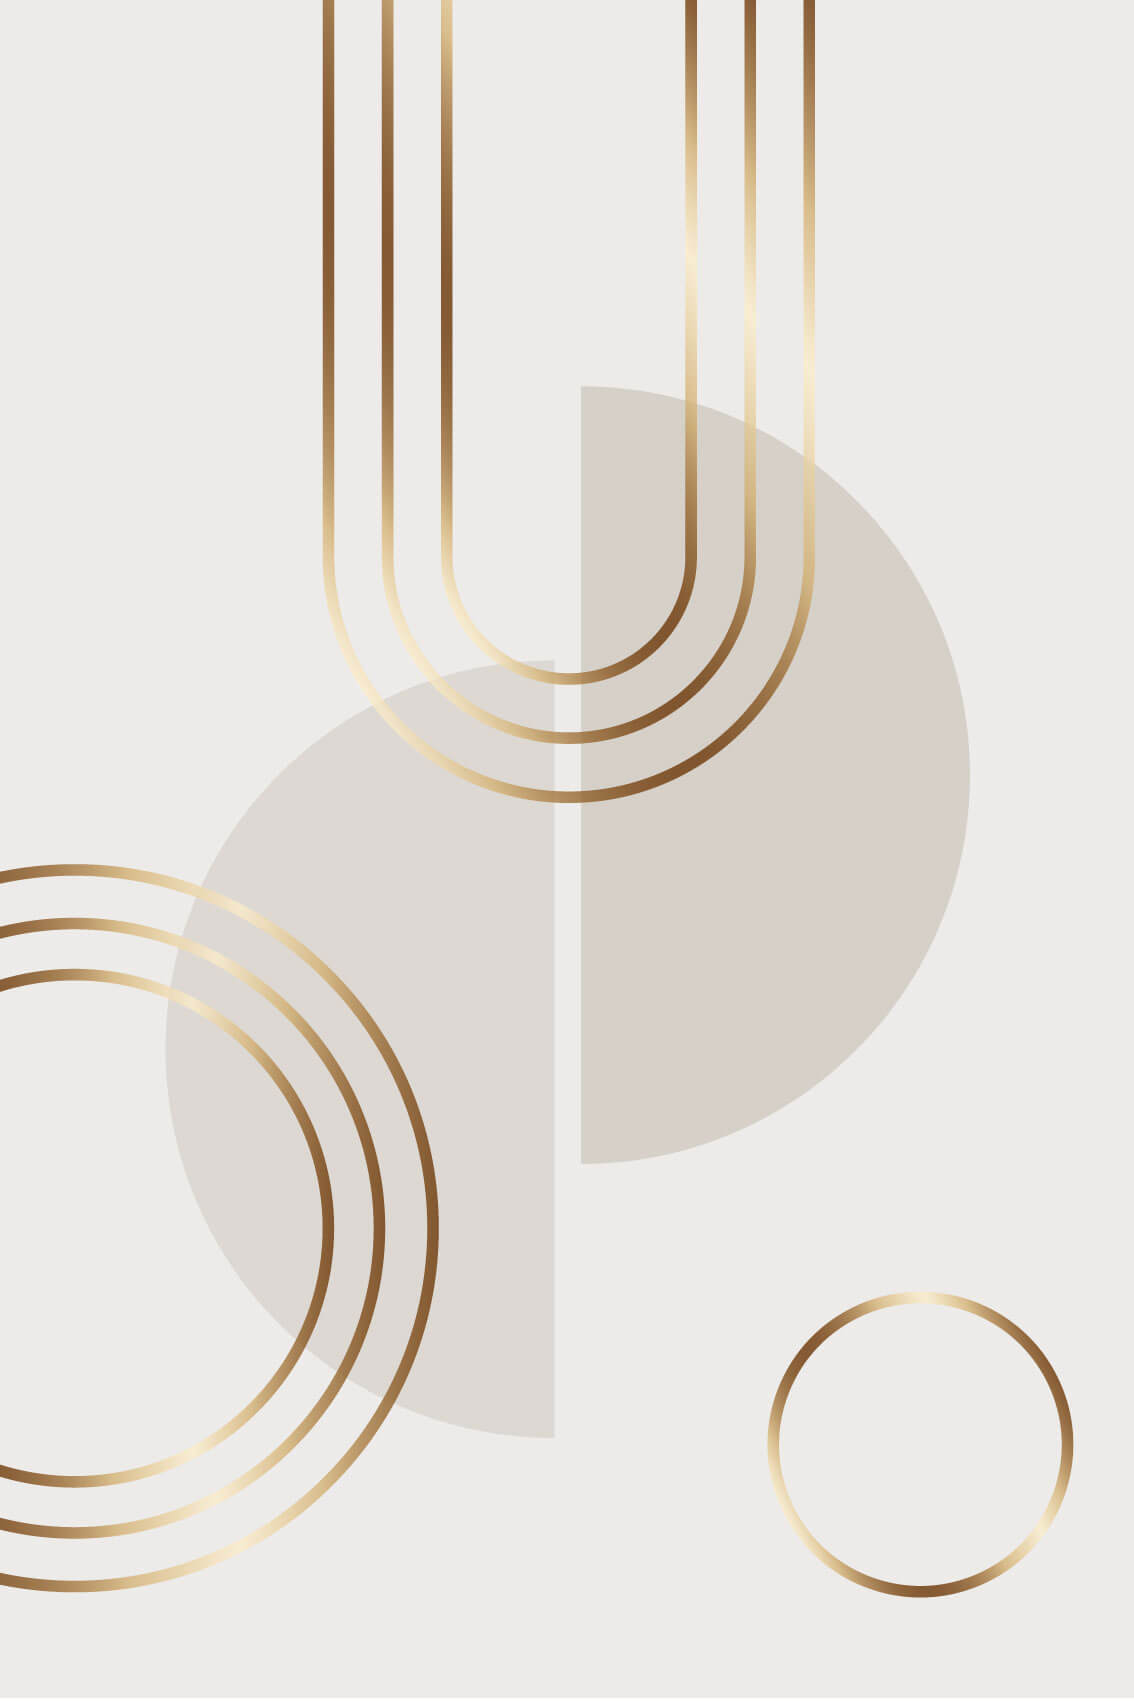 Abstract gold shapes poster